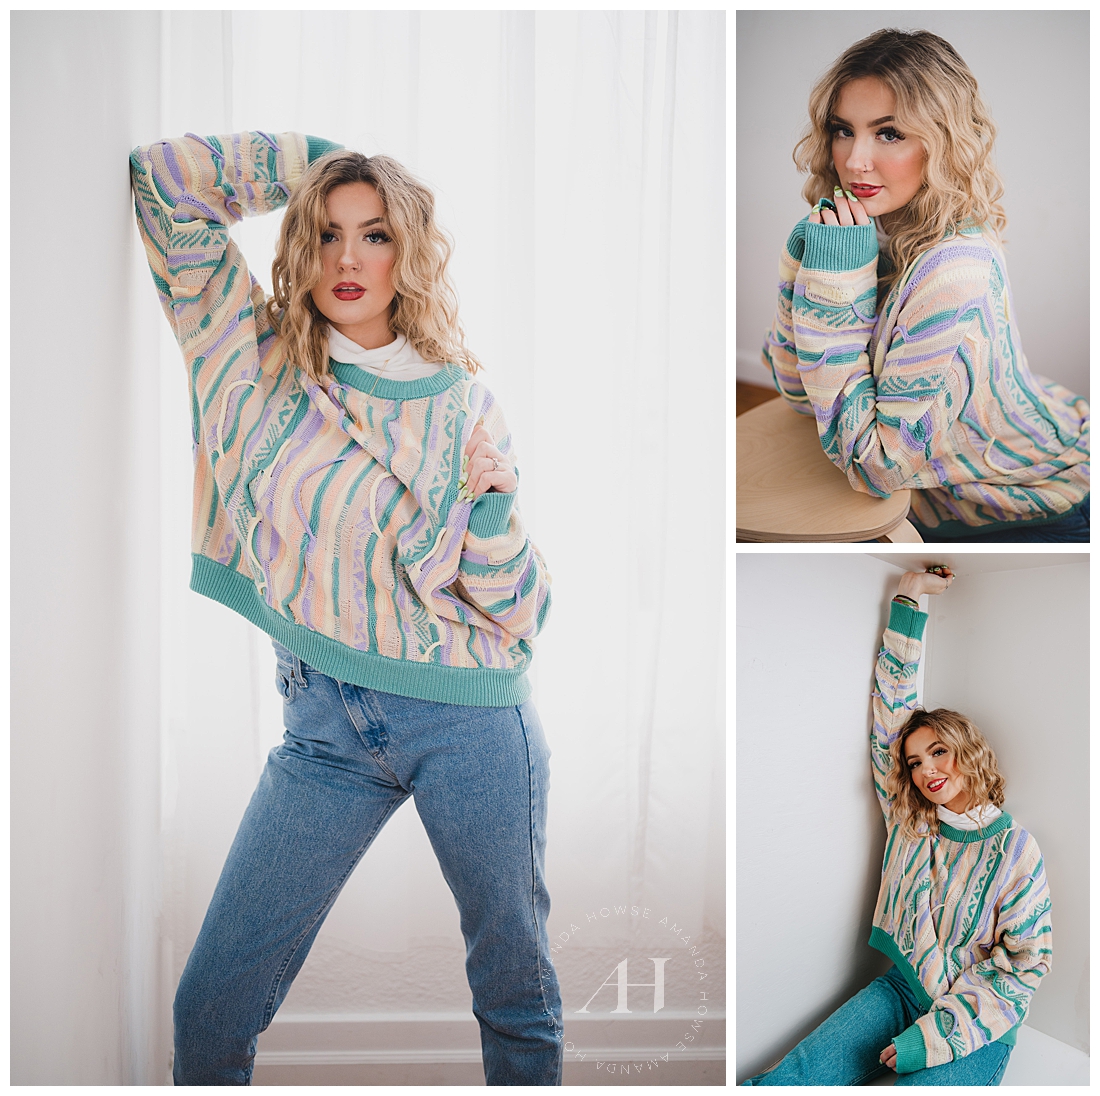 Glam Photoshoot with Gorgeous Hair and Makeup | 1980s Fashion, How to Style Mom Jeans, an Oversized Sweater, and Turtleneck | Photographed by Tacoma Senior Portrait Photographer Amanda Howse